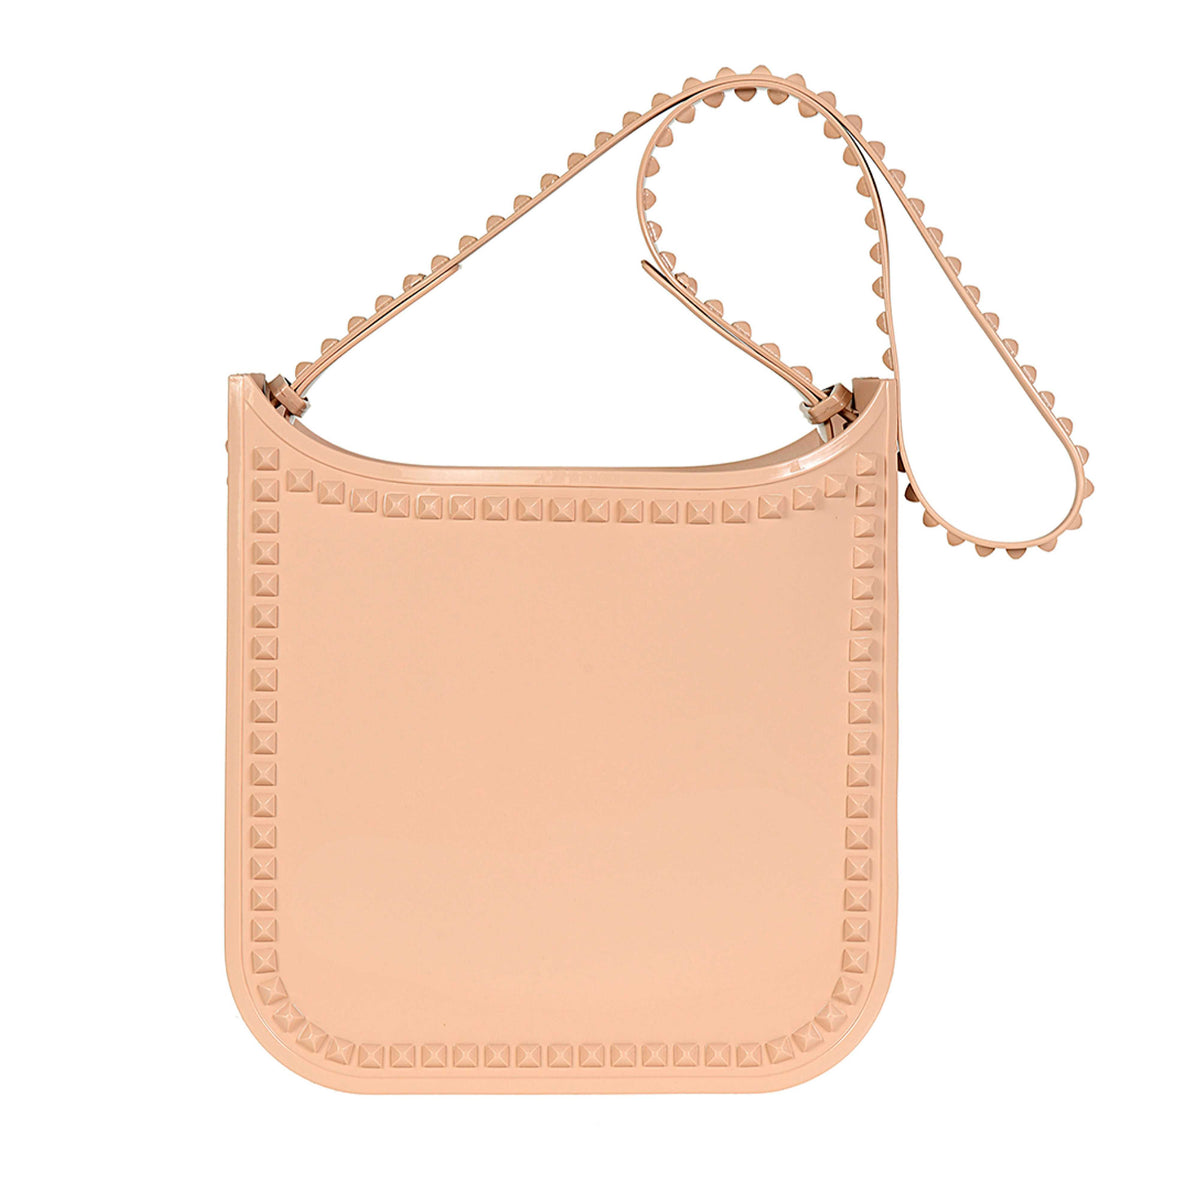 Fico large jelly purse in color blush